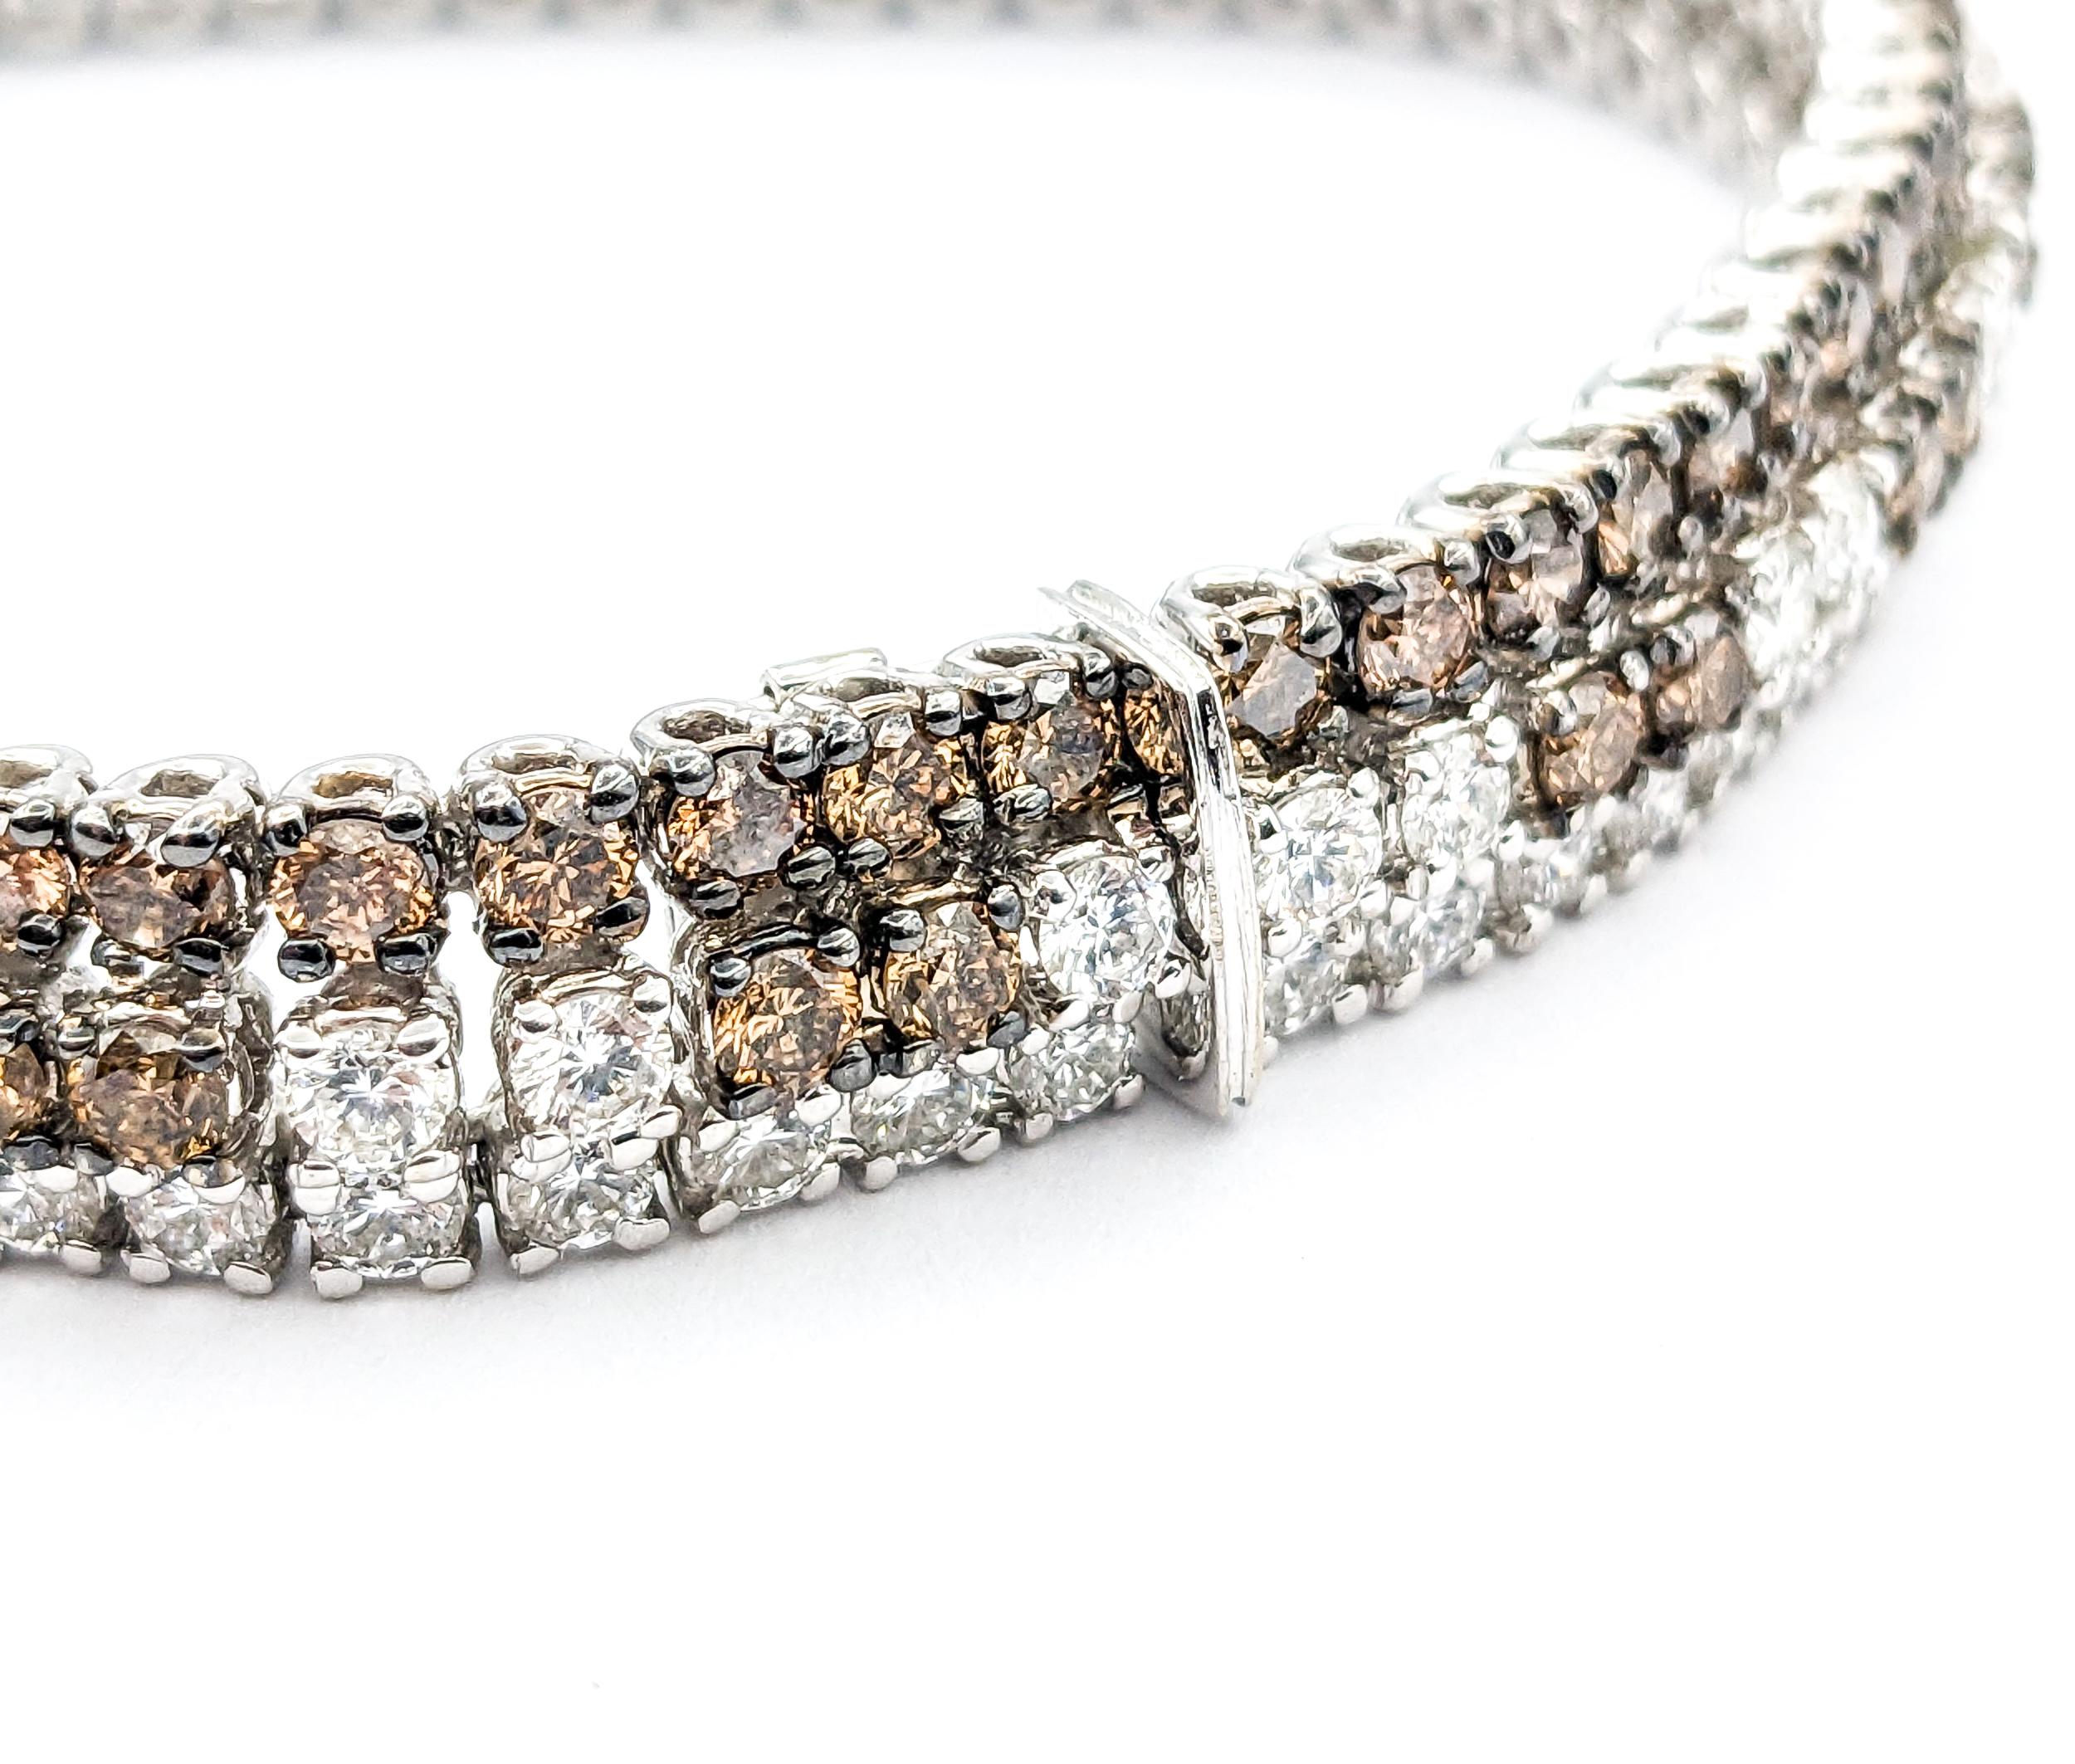 11.85ctw Diamond 3 Line Bi-Color Bracelet In White Gold

This magnificent Bracelet 3 Line Bi-Color is a luxurious piece crafted in 18kt white gold, showcasing a stunning array of round diamonds totaling 11.85 carats. The diamonds are graded SI1-VS2